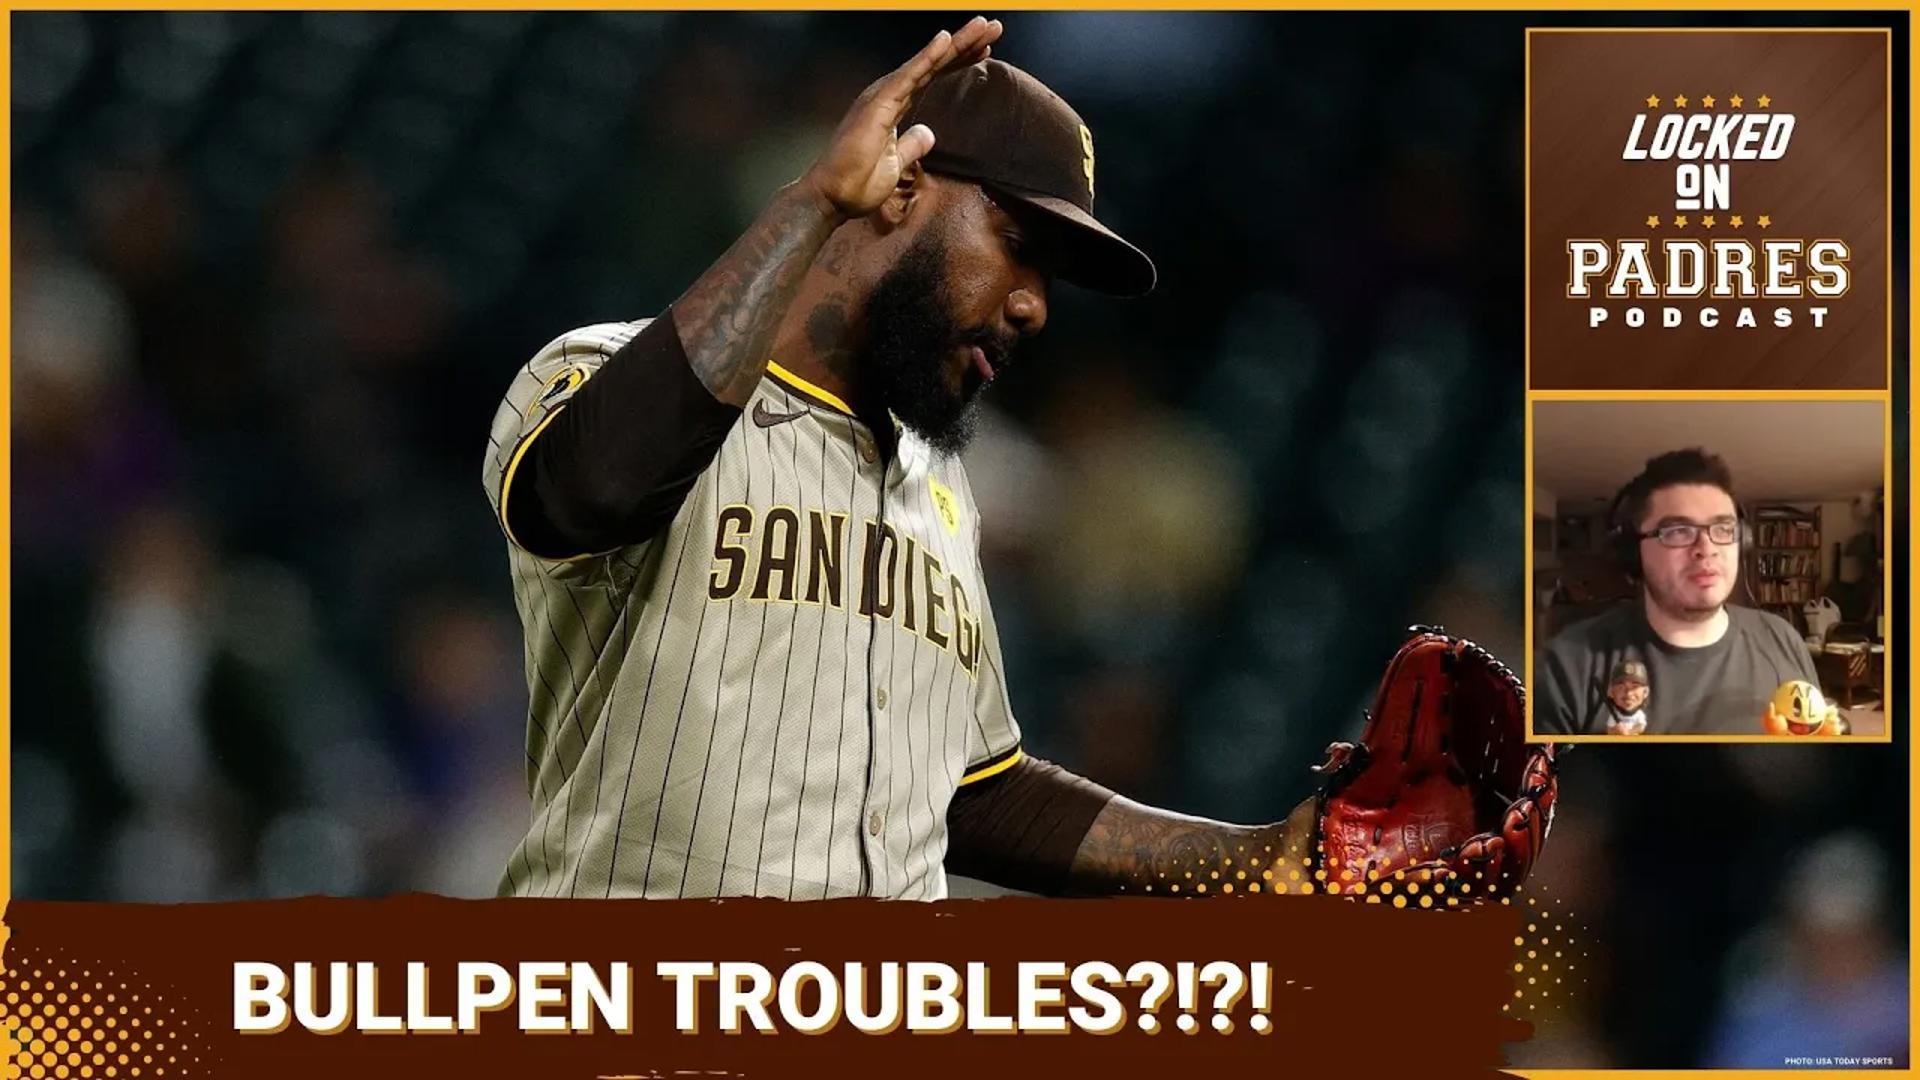 On today's episode, Javier recaps the Padres TRAGIC loss to the Cubs on a walk off.